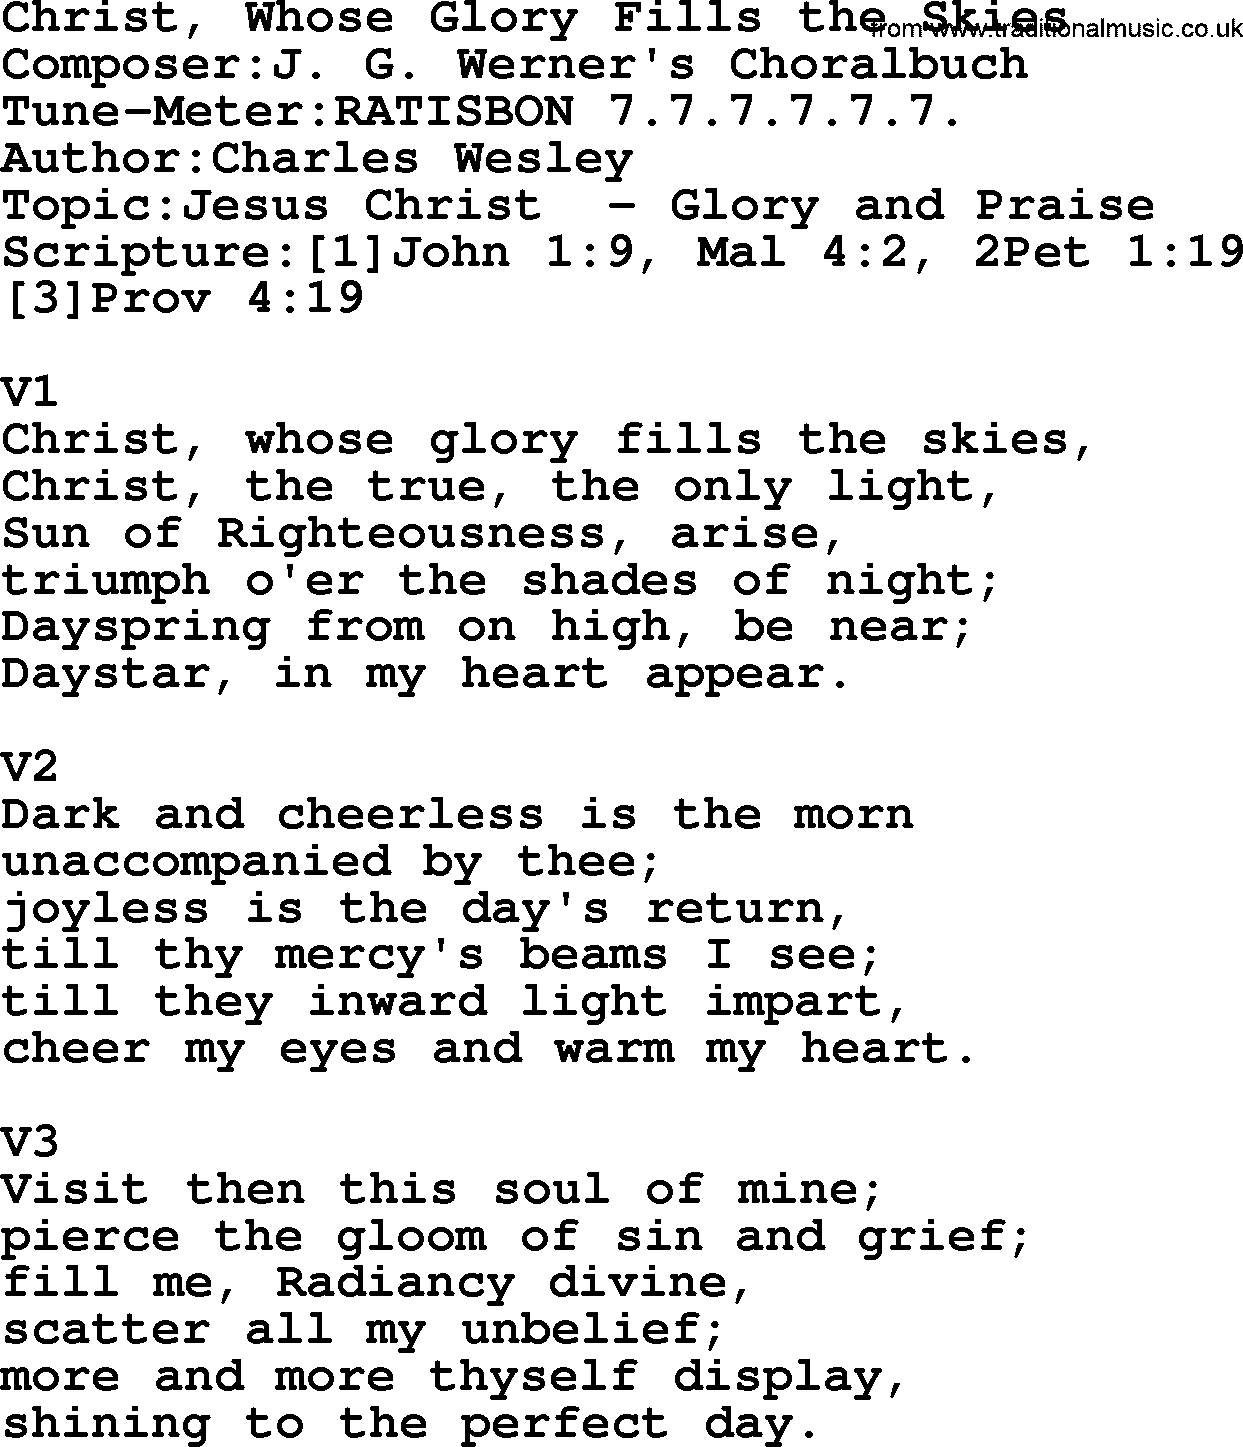 Adventist Hynms collection, Hymn: Christ, Whose Glory Fills The Skies, lyrics with PDF